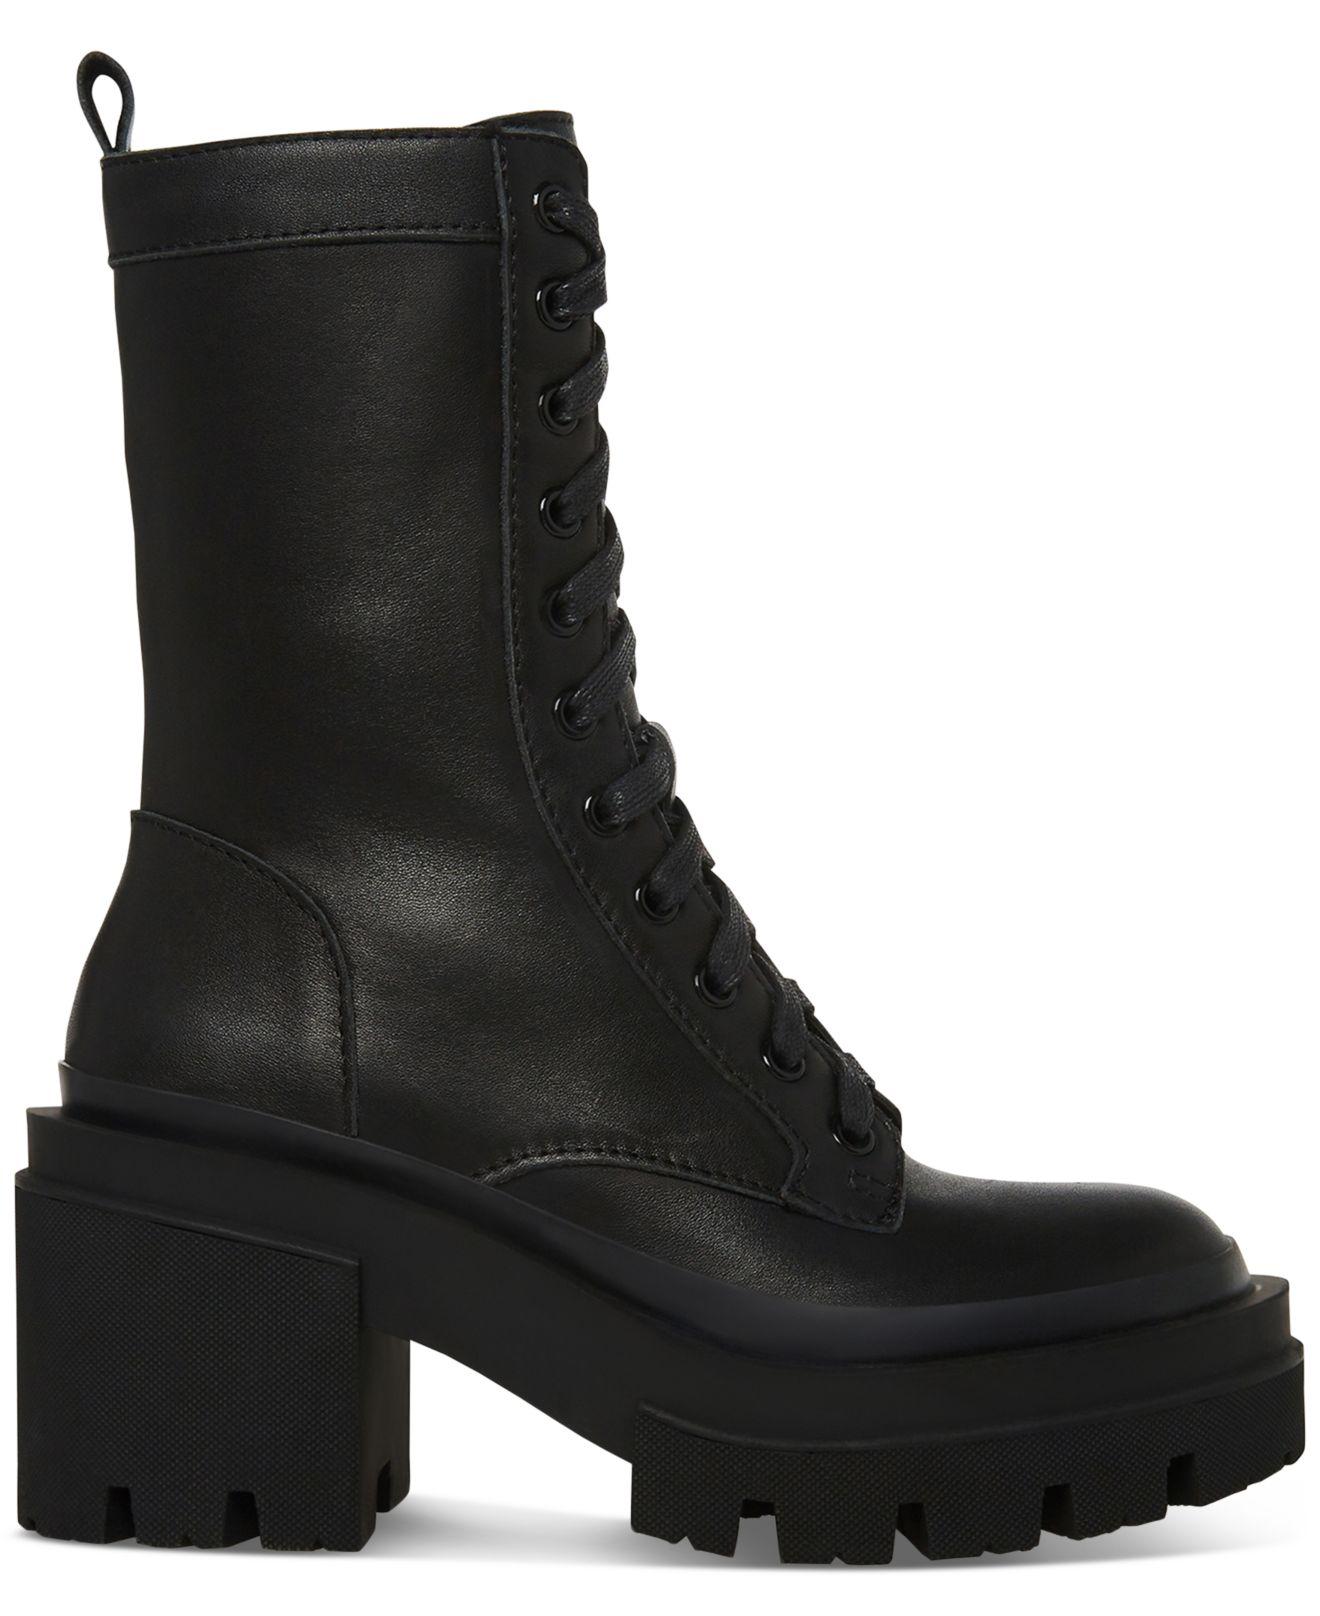 Matryx Lace-up Lug-sole Booties in Black Lyst